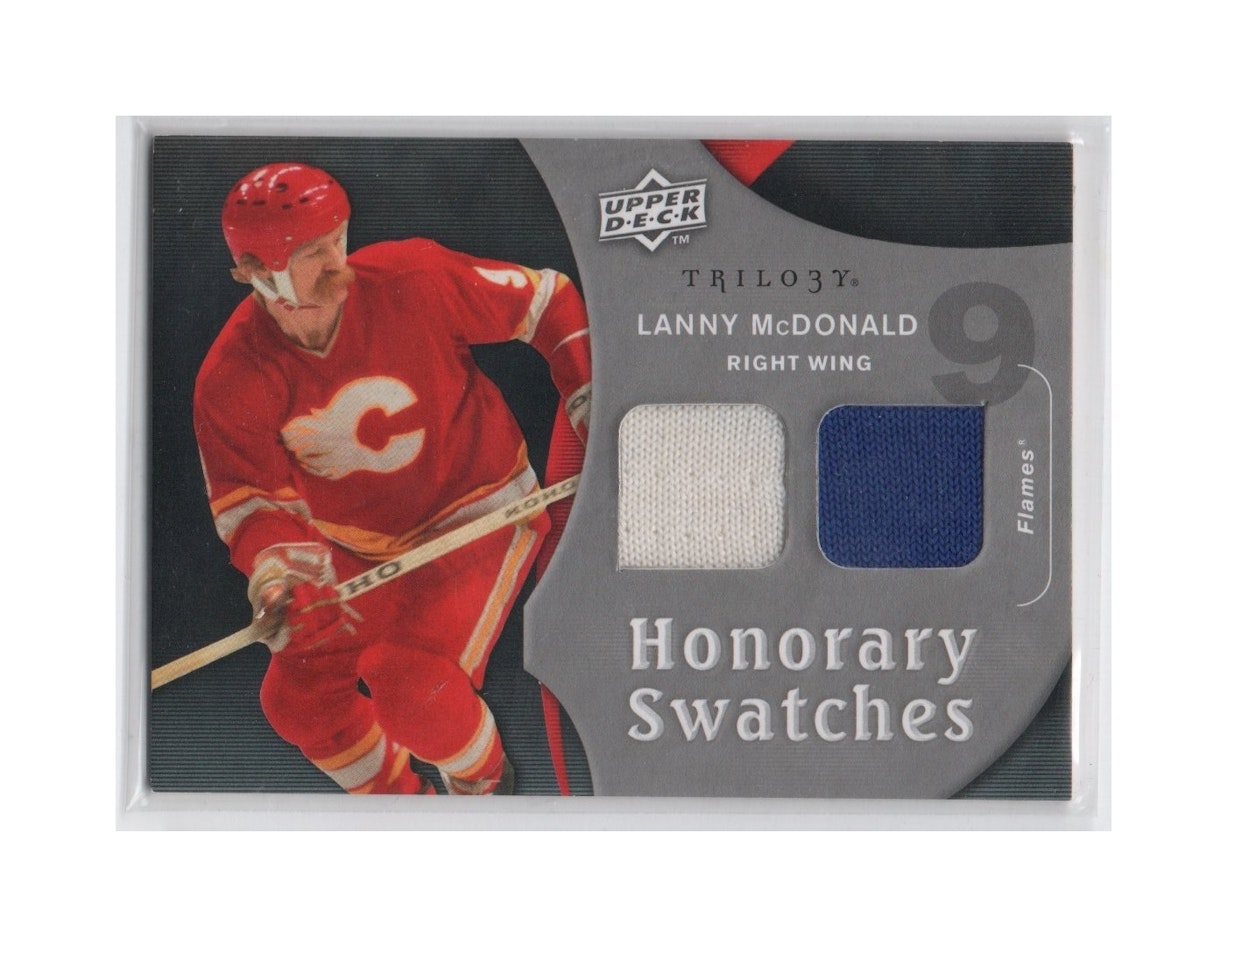 2009-10 Upper Deck Trilogy Honorary Swatches #HSLM Lanny McDonald (40-D7-FLAMES)